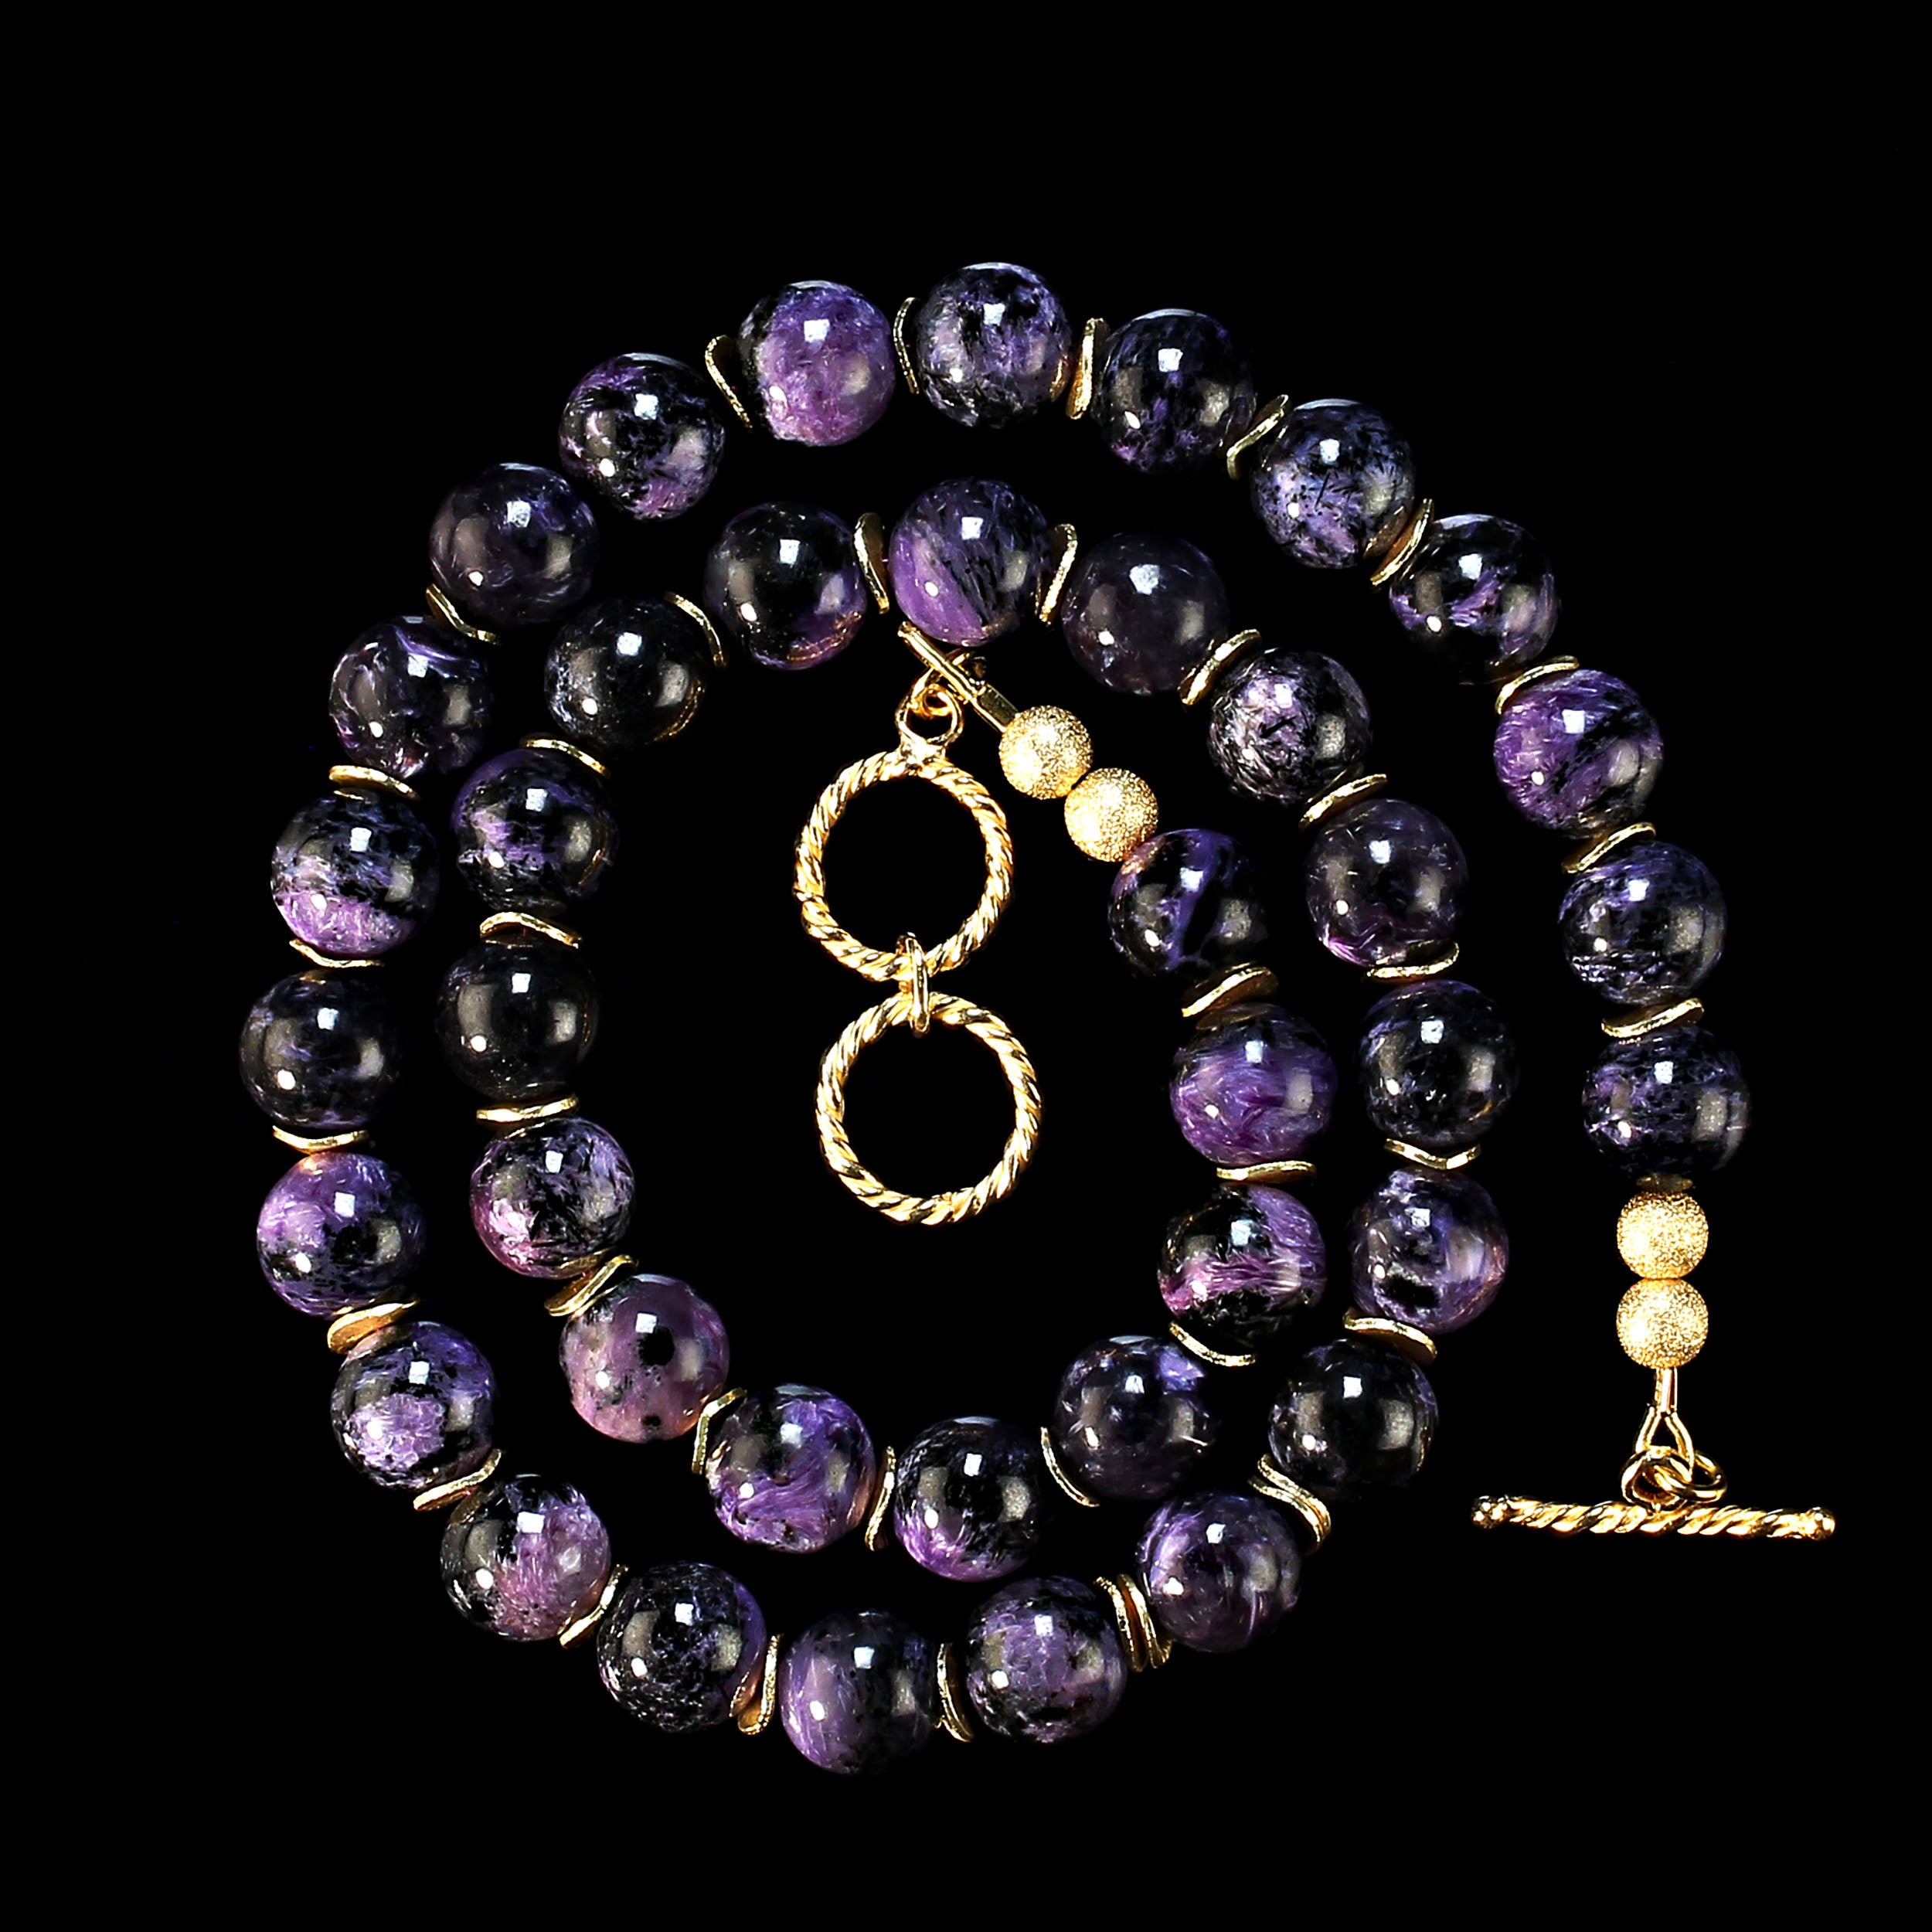  Purple Charoite Necklace with Goldy Accents  Perfect Gift! For Sale